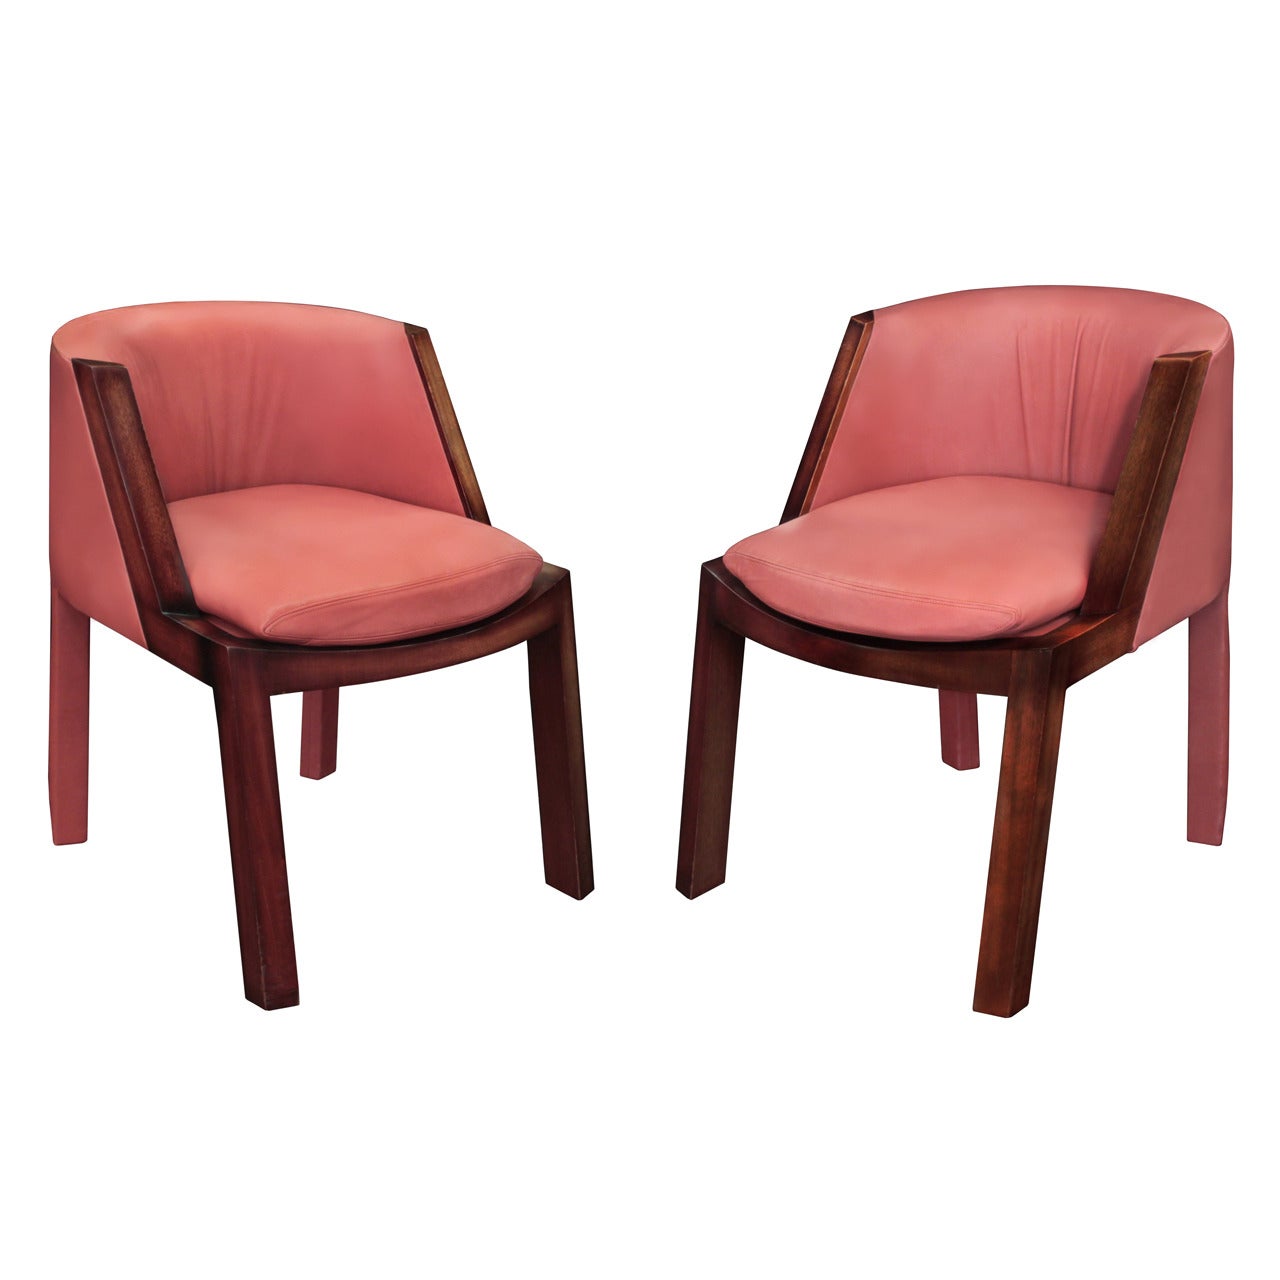 Pair of Lounge Chairs with Rose Leather by Agati